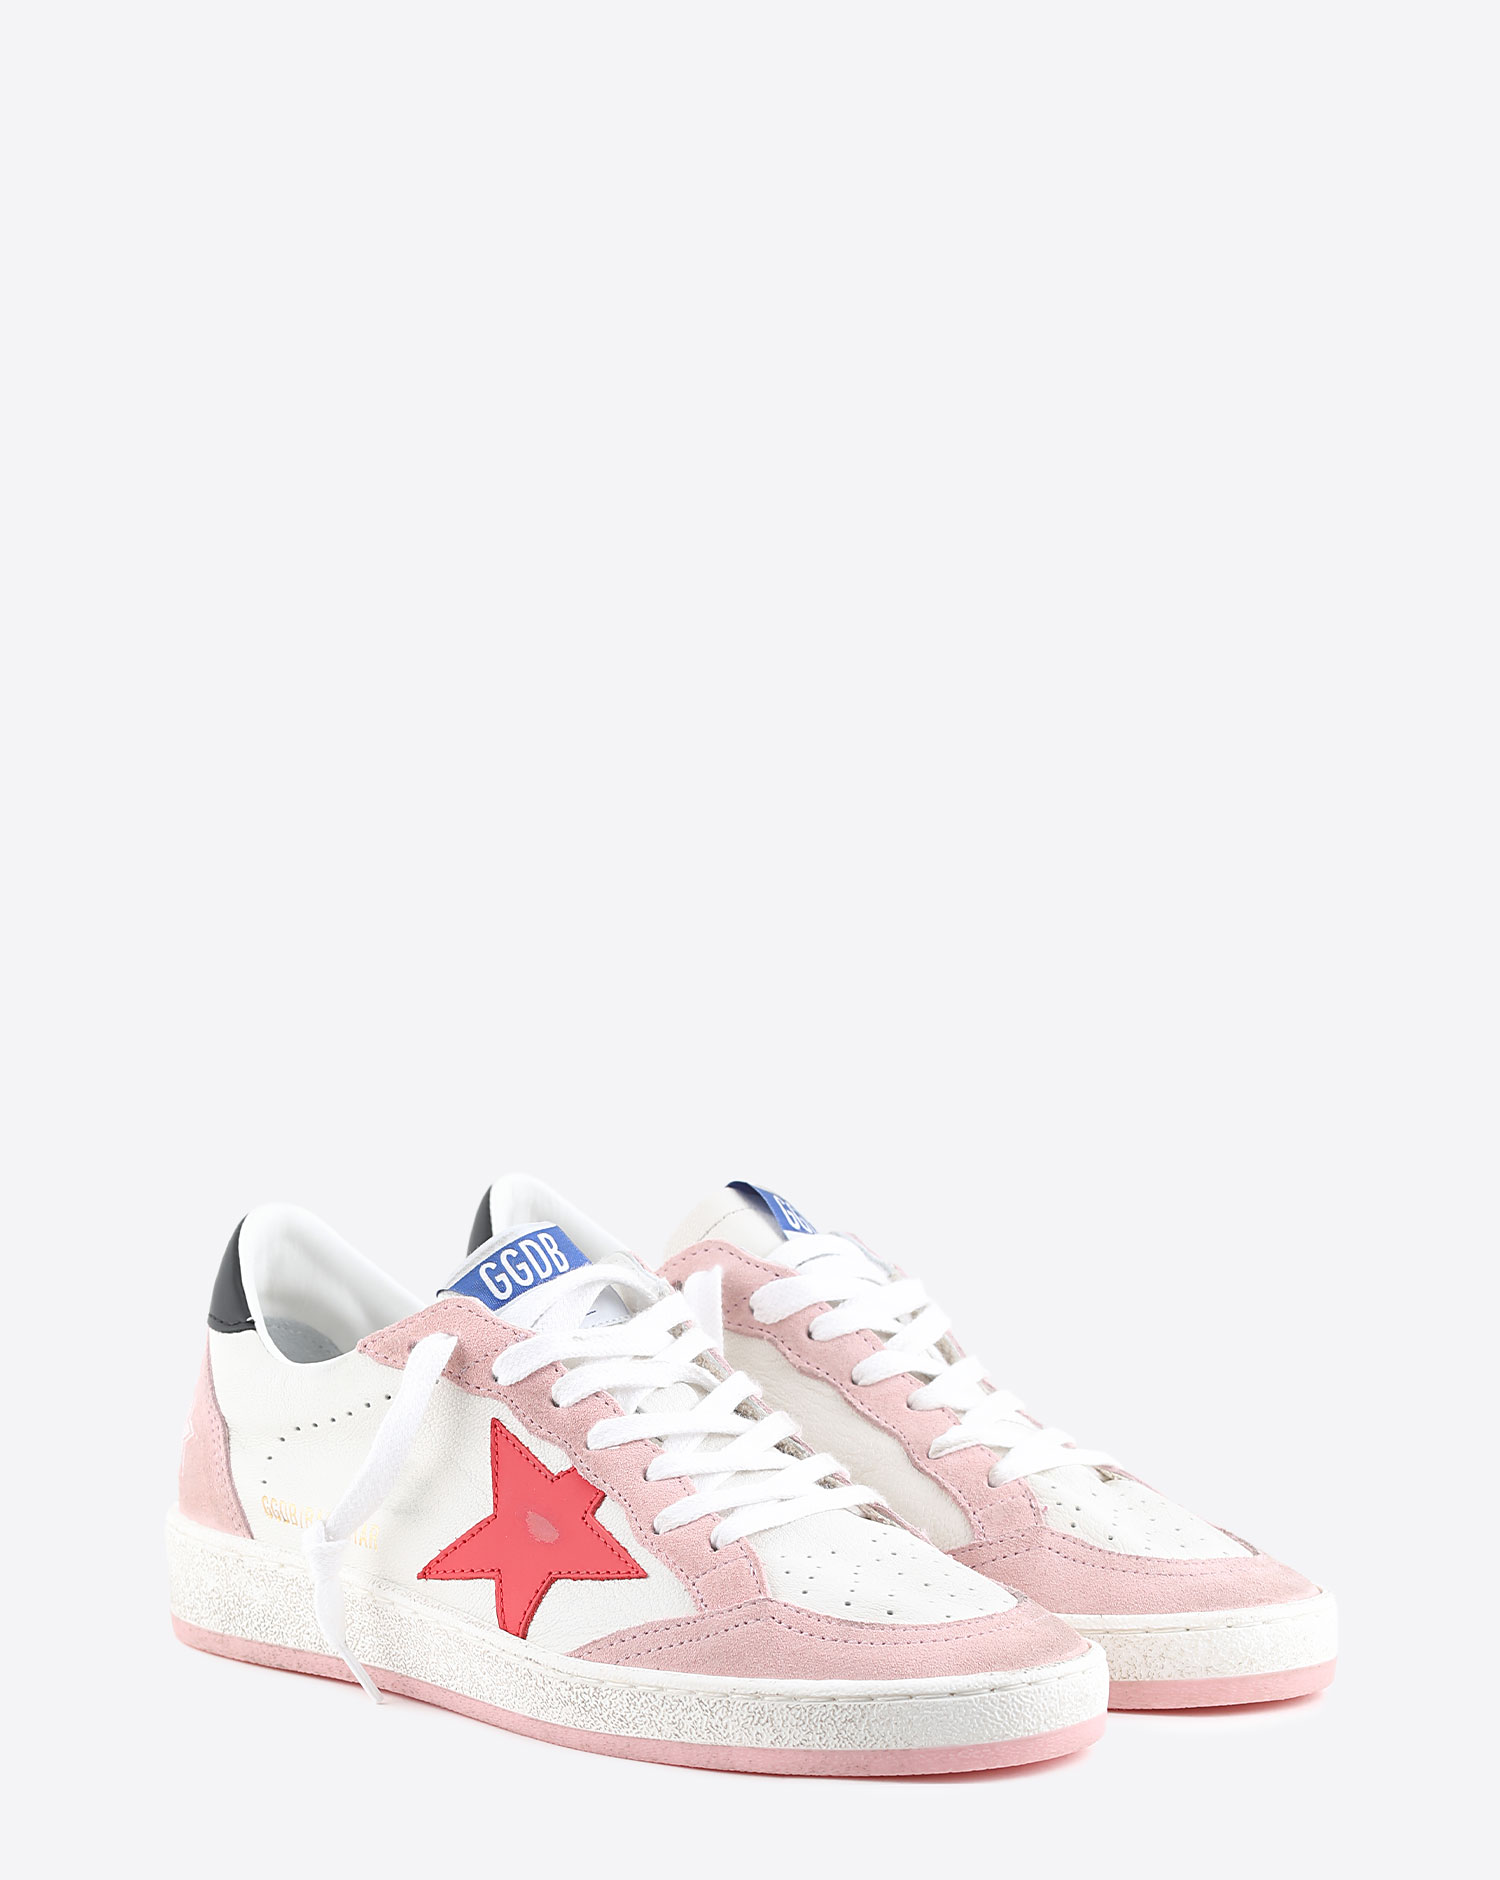 Sneakers Golden Goose Ball Star - White Pink Red Black 10880